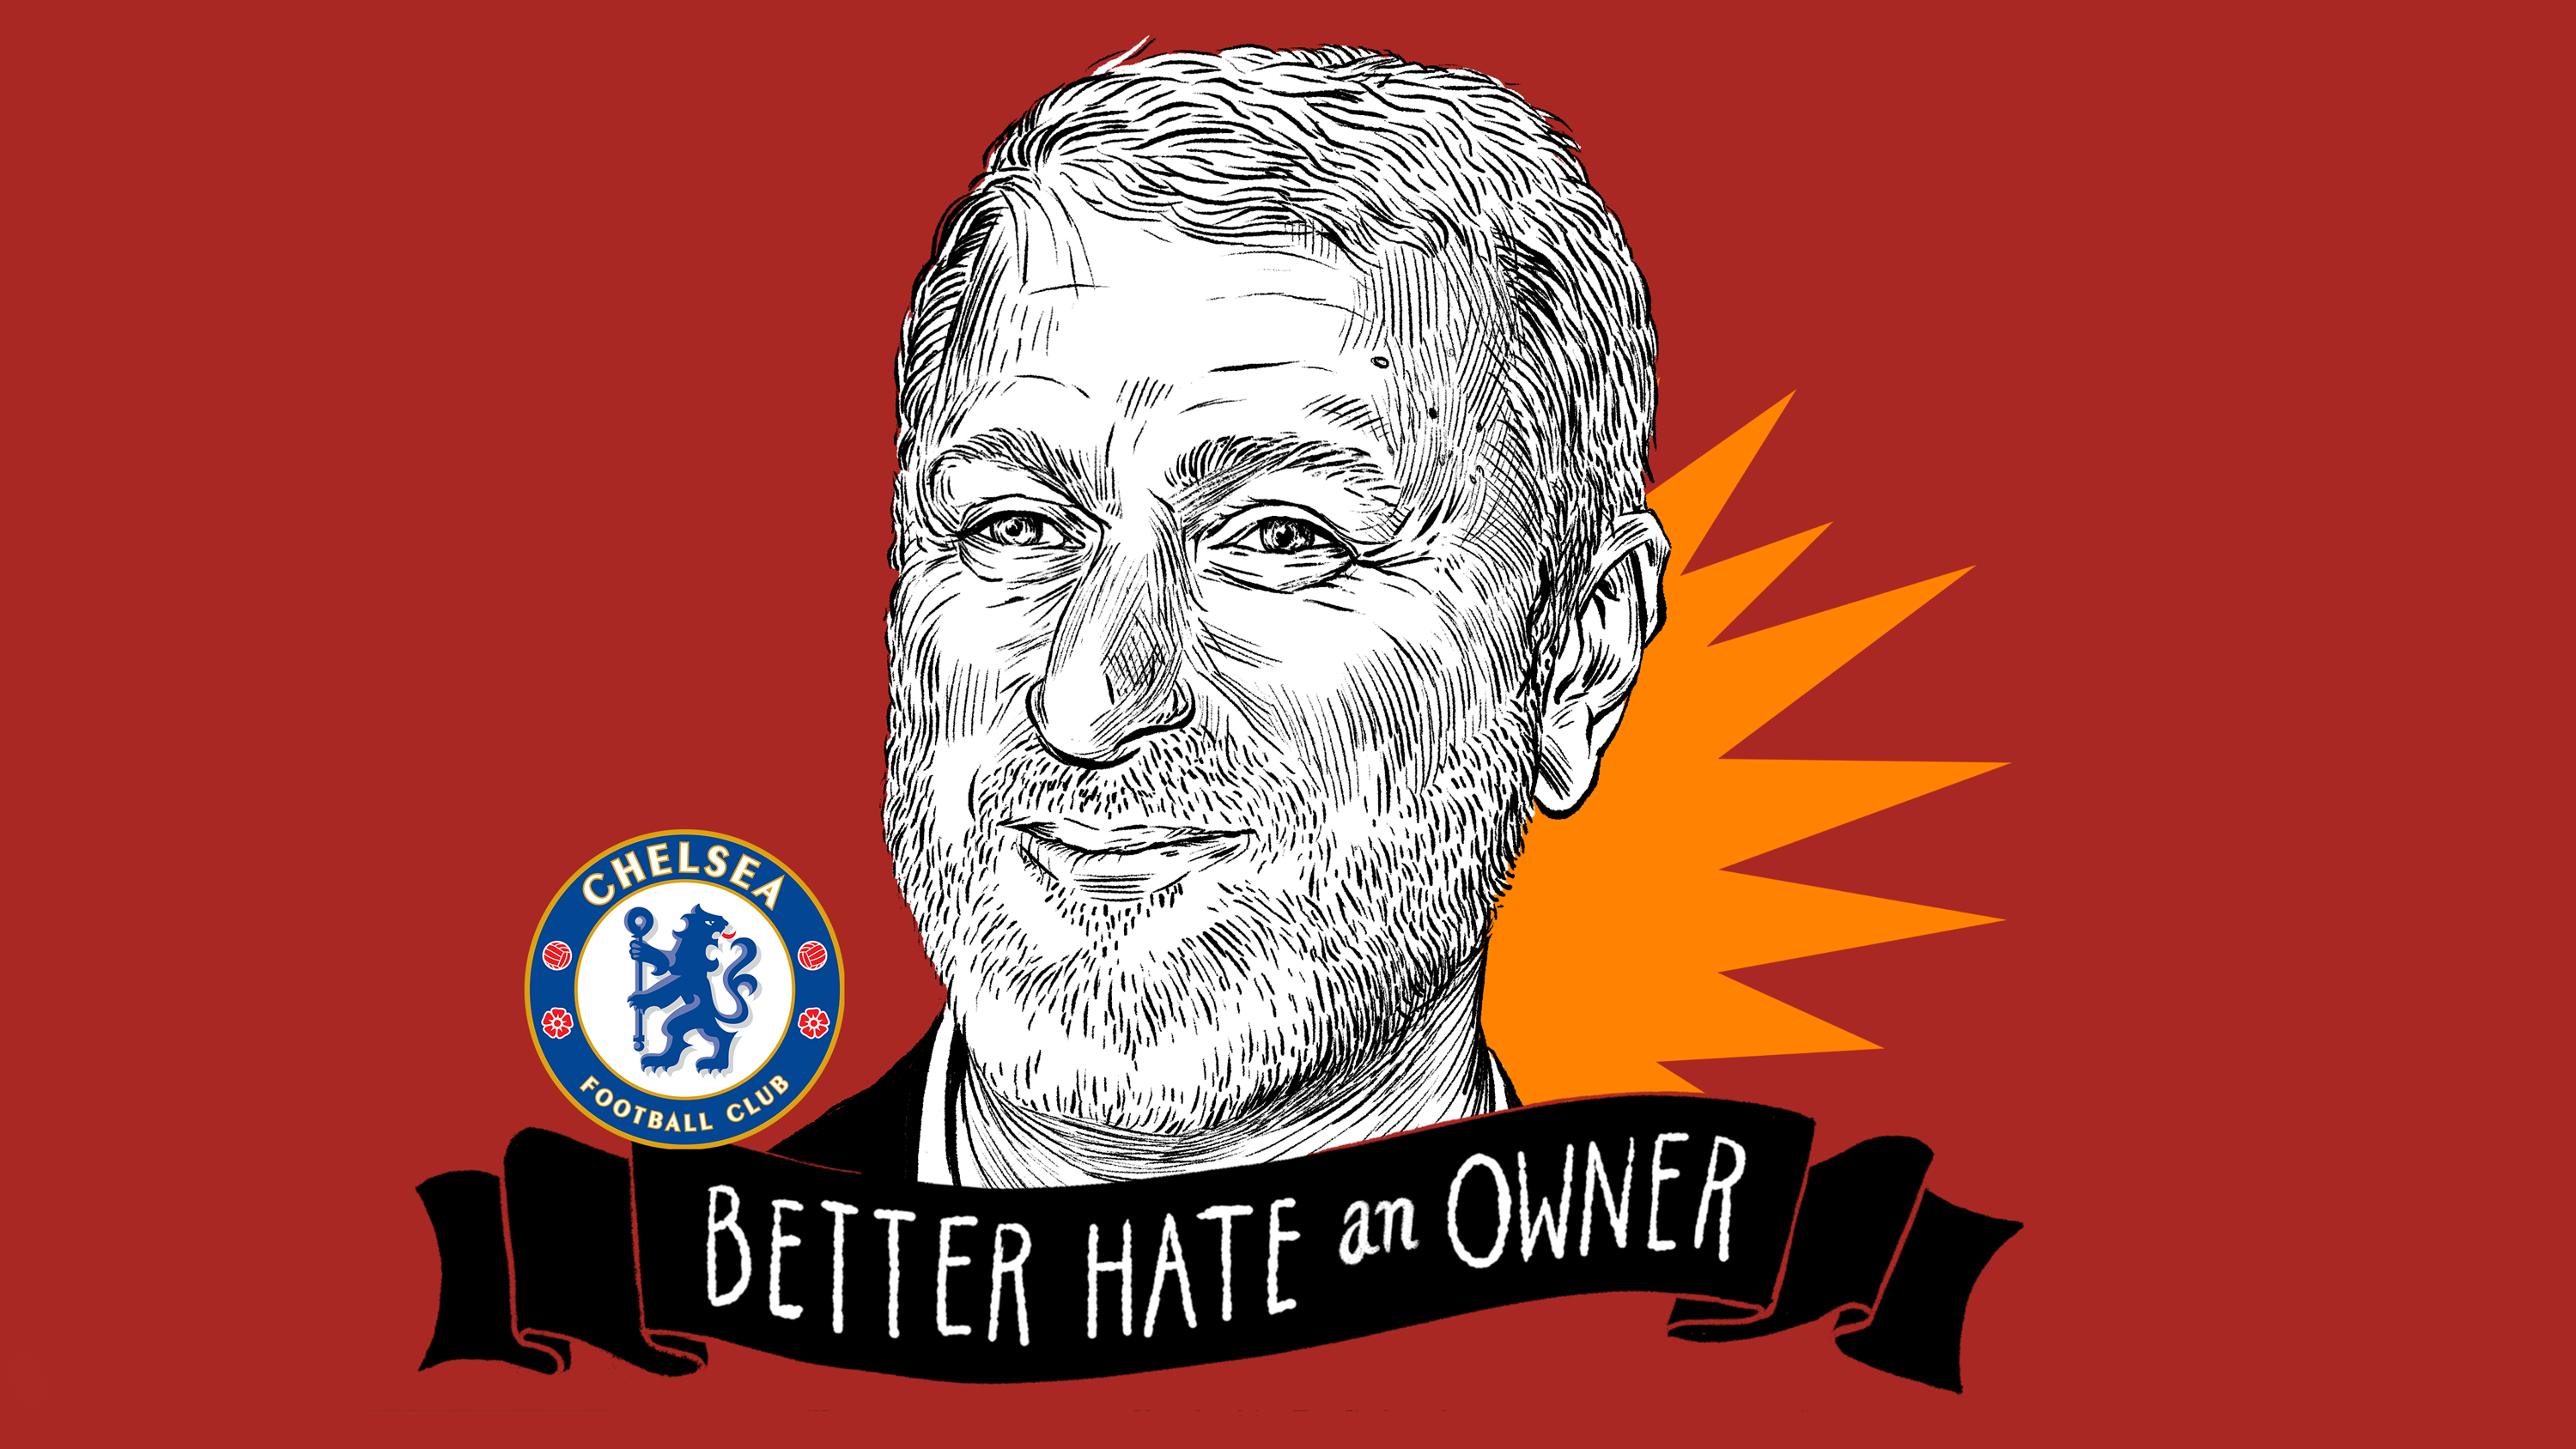 Very cool illustration of Chelsea owner Roman Abramovich.